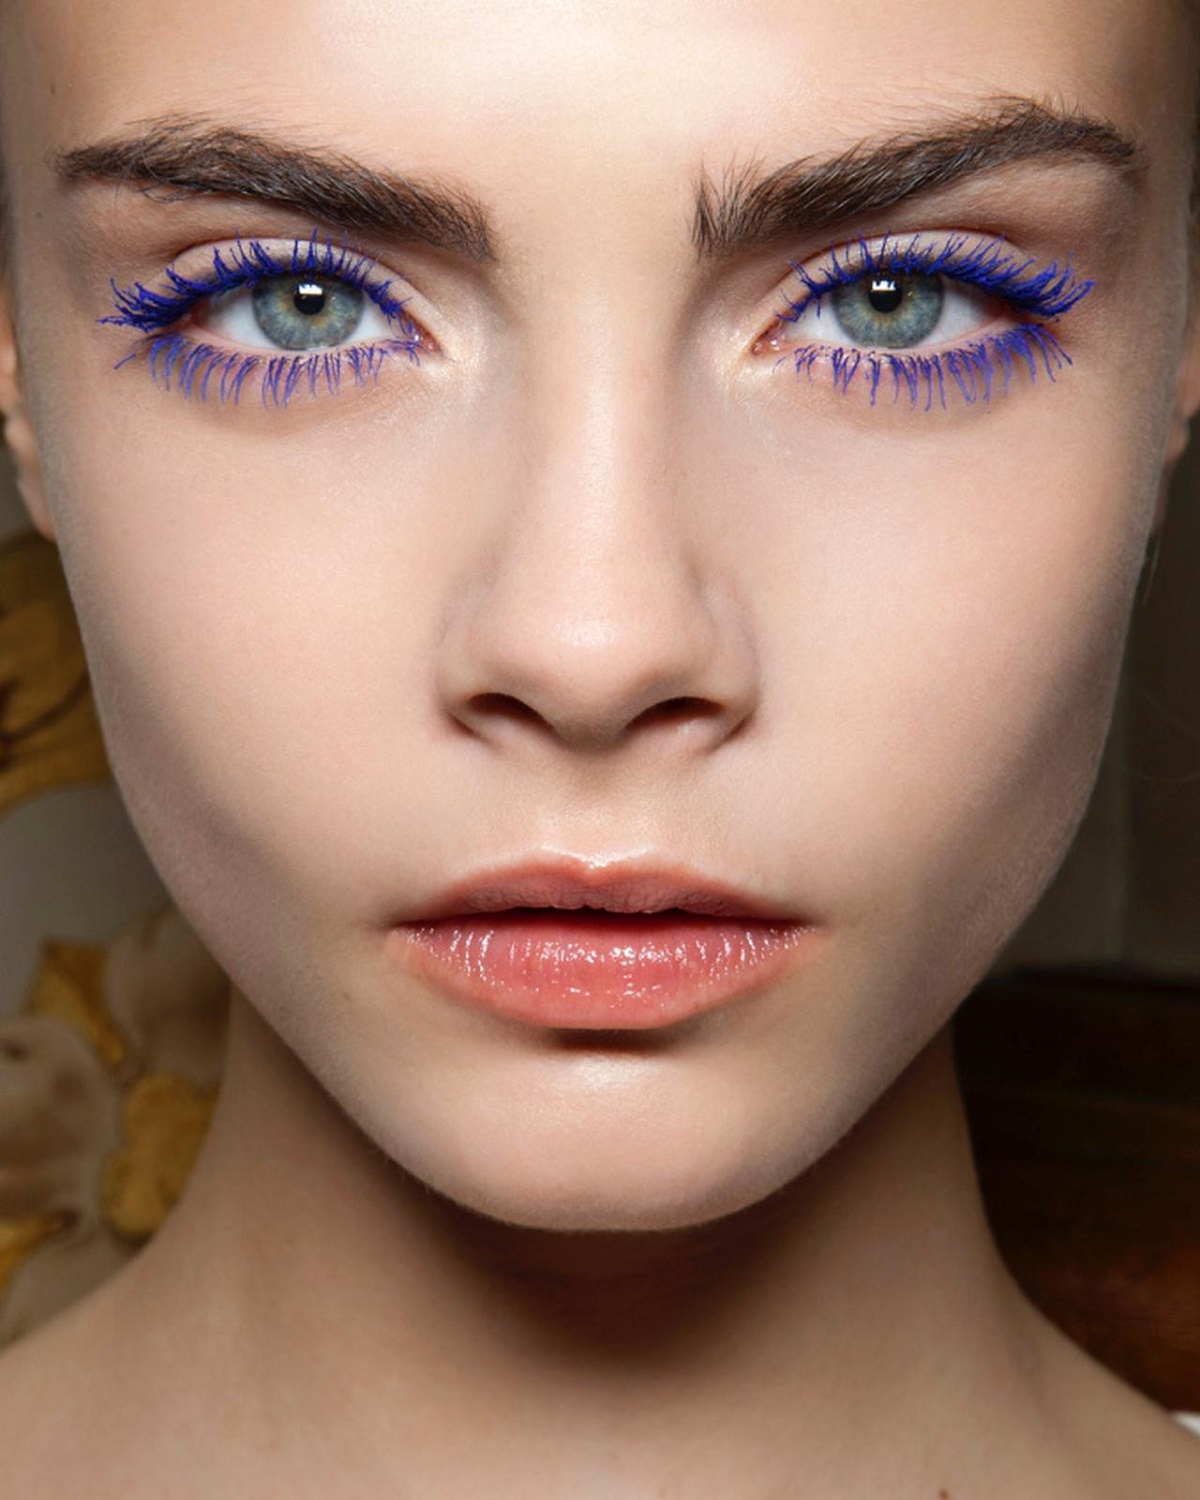 Using the Right Colors of Mascara